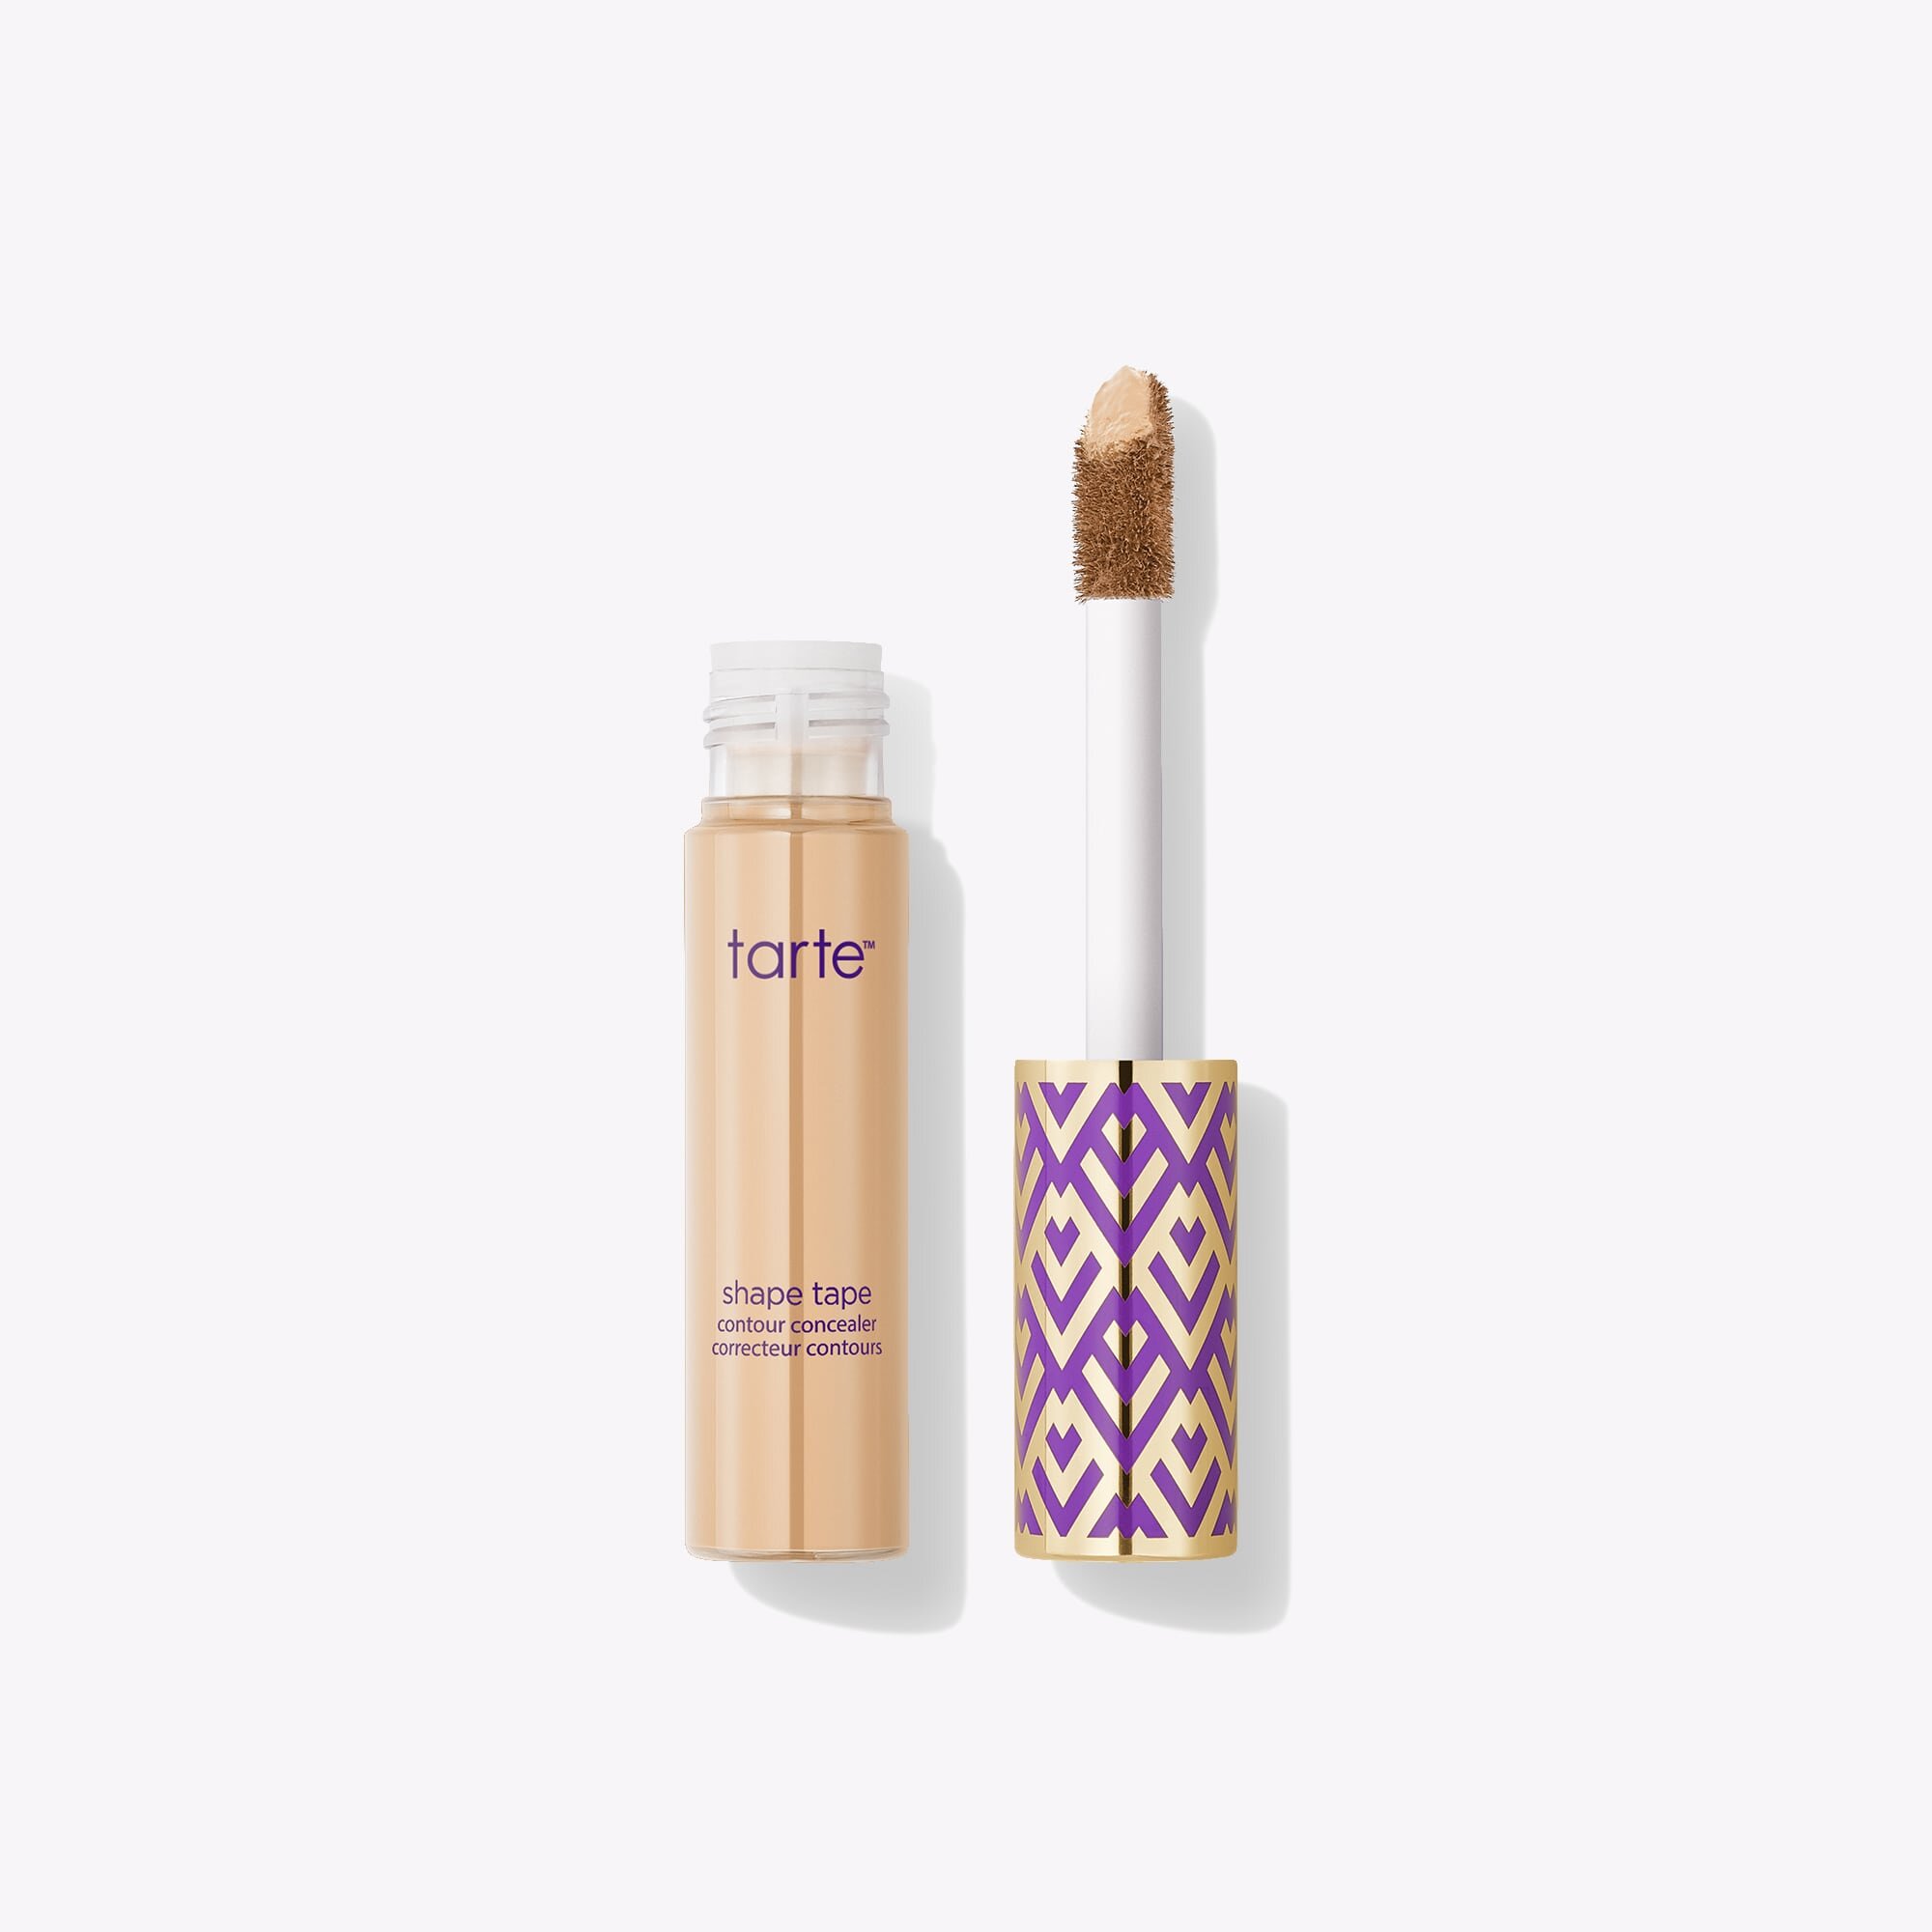 Tarte Shape Tape Concealer in the color Tan Sand - Photo Credit: Tarte CosmeticsSephora no longer carries this product but can be purchased from Tarte’s website and Ulta and is $27. The concealer has shea butter to help moisturize skin, mango seed butter that helps nourish skin and licorice root is used to help brighten. It is a vegan, blendable and has a full coverage formula.